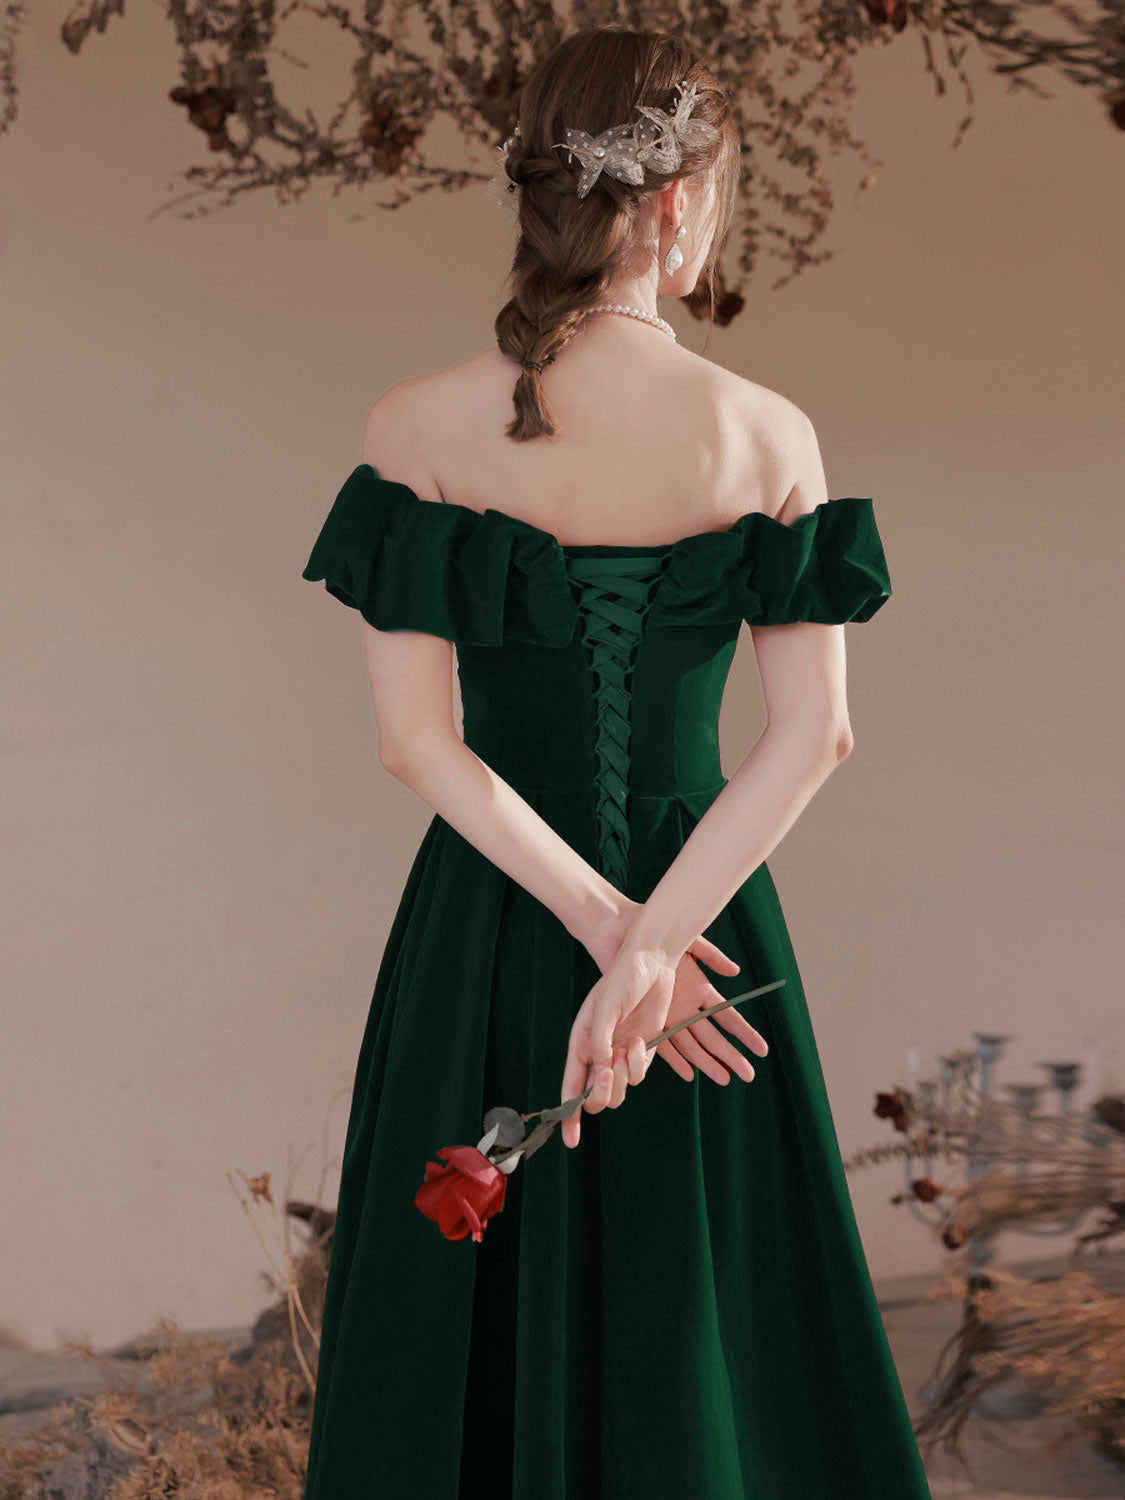 Buy Dark Green Gown Online In India - Etsy India